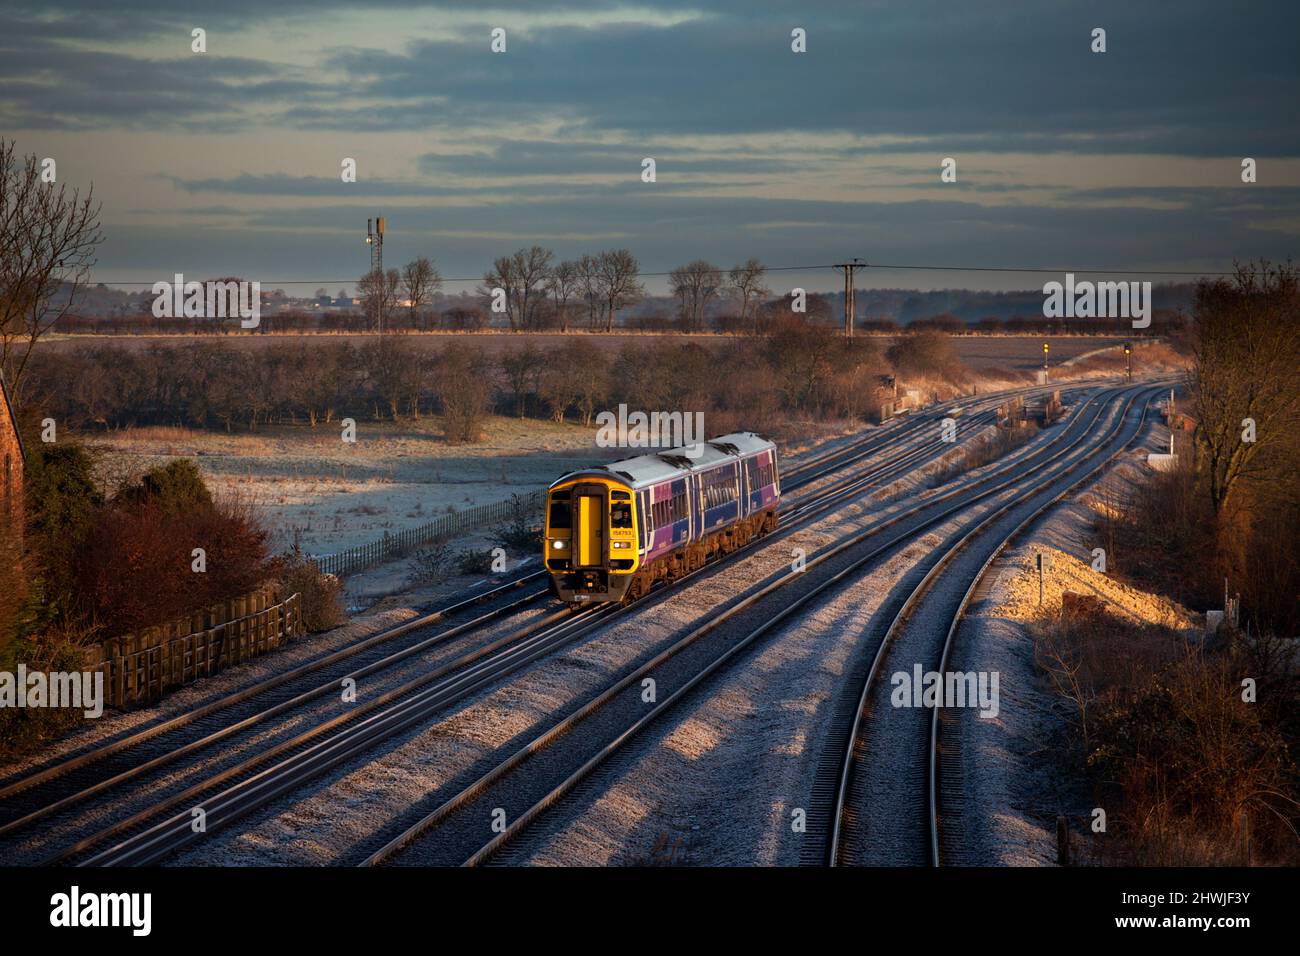 Northern rail class 158 express sprinter train 158753 at sunrise in the winter light running along a 4 track railway with frost on the ground Stock Photo